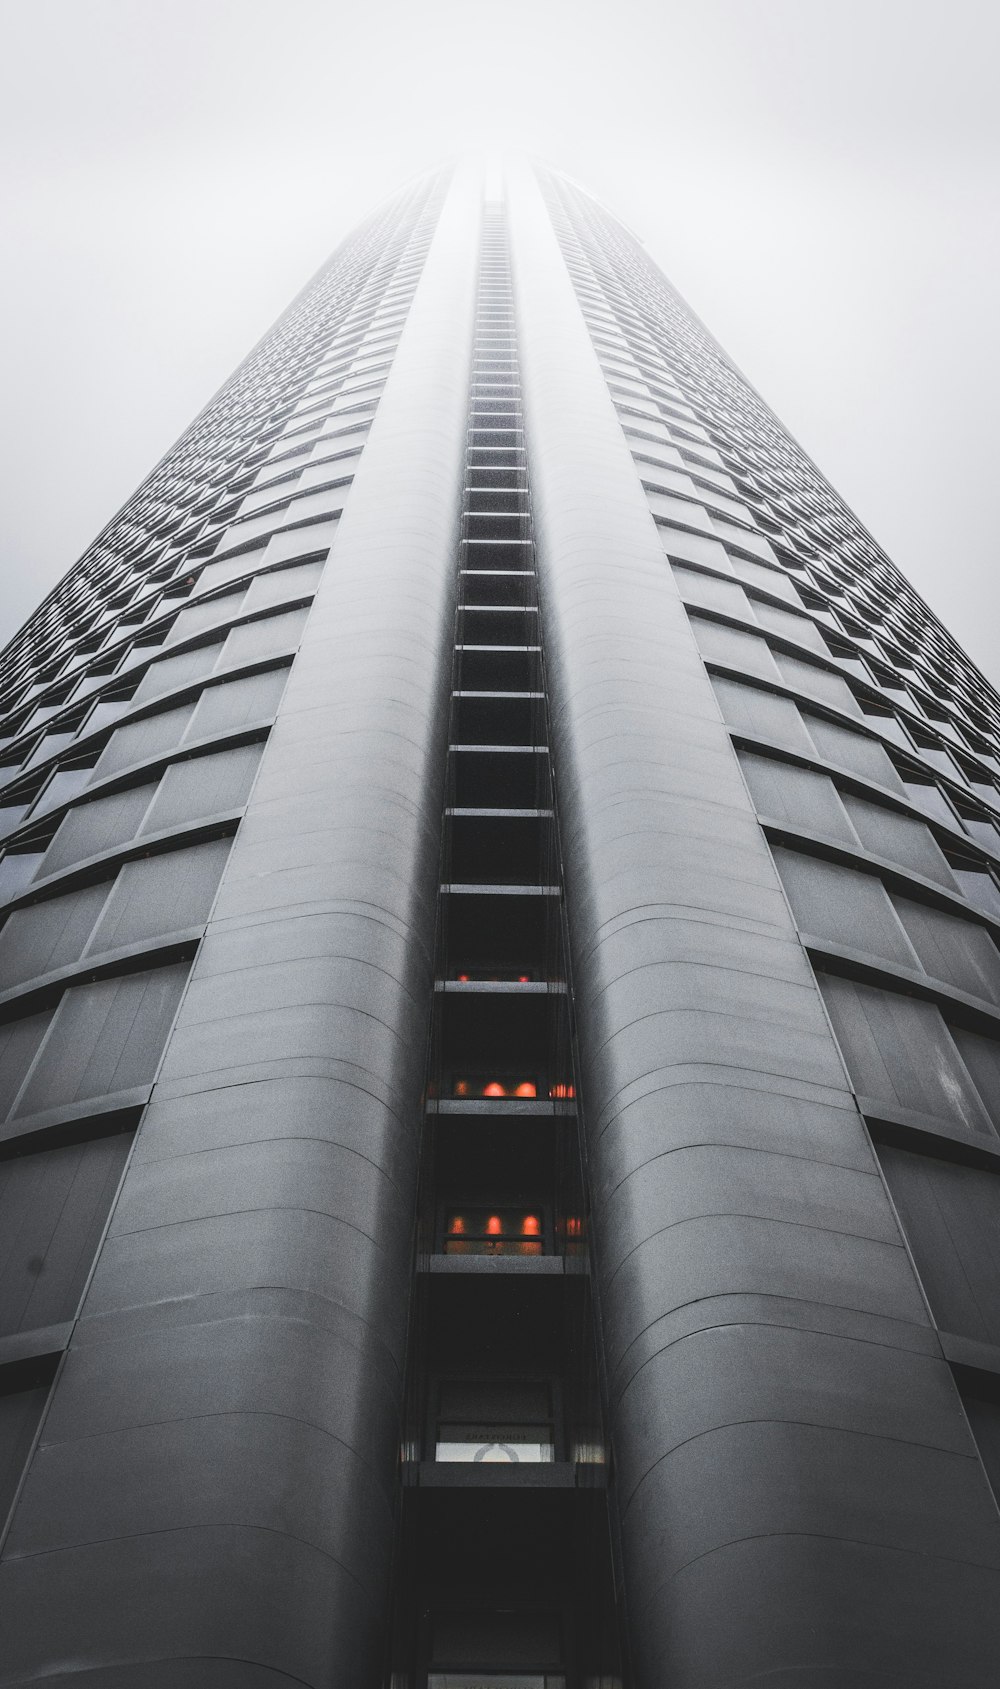 worm's eye view of high-rise building